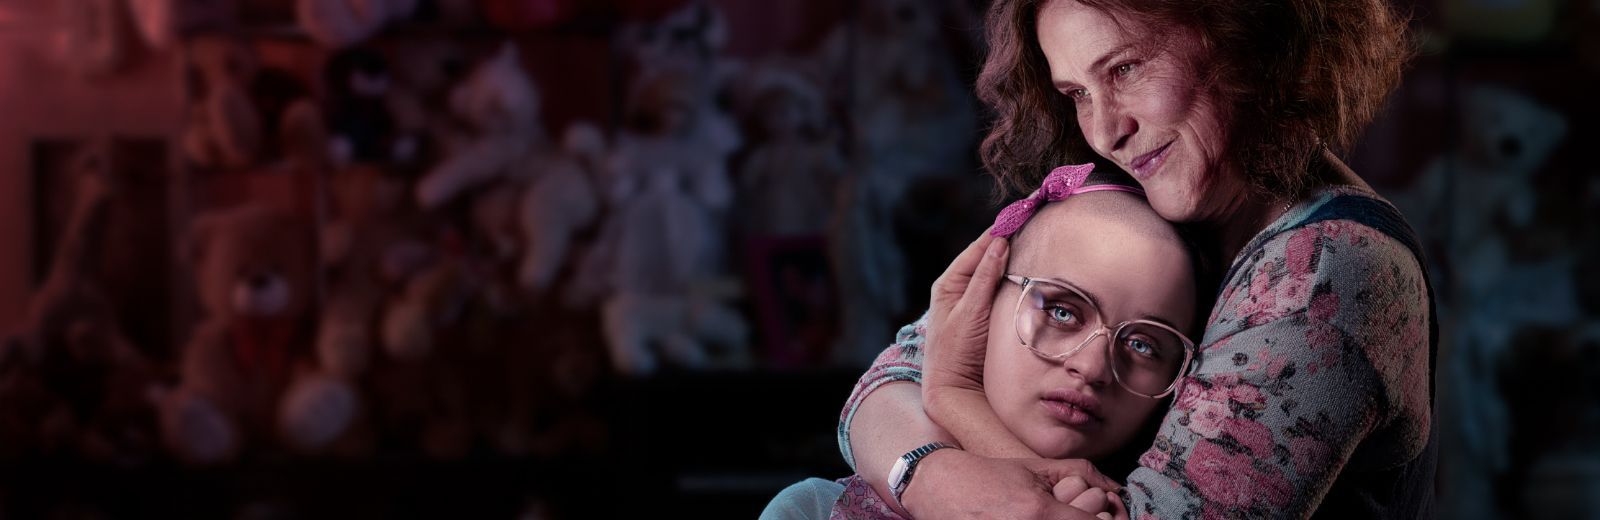 Angels and Demons and Daughters: On Hulu's "The Act"